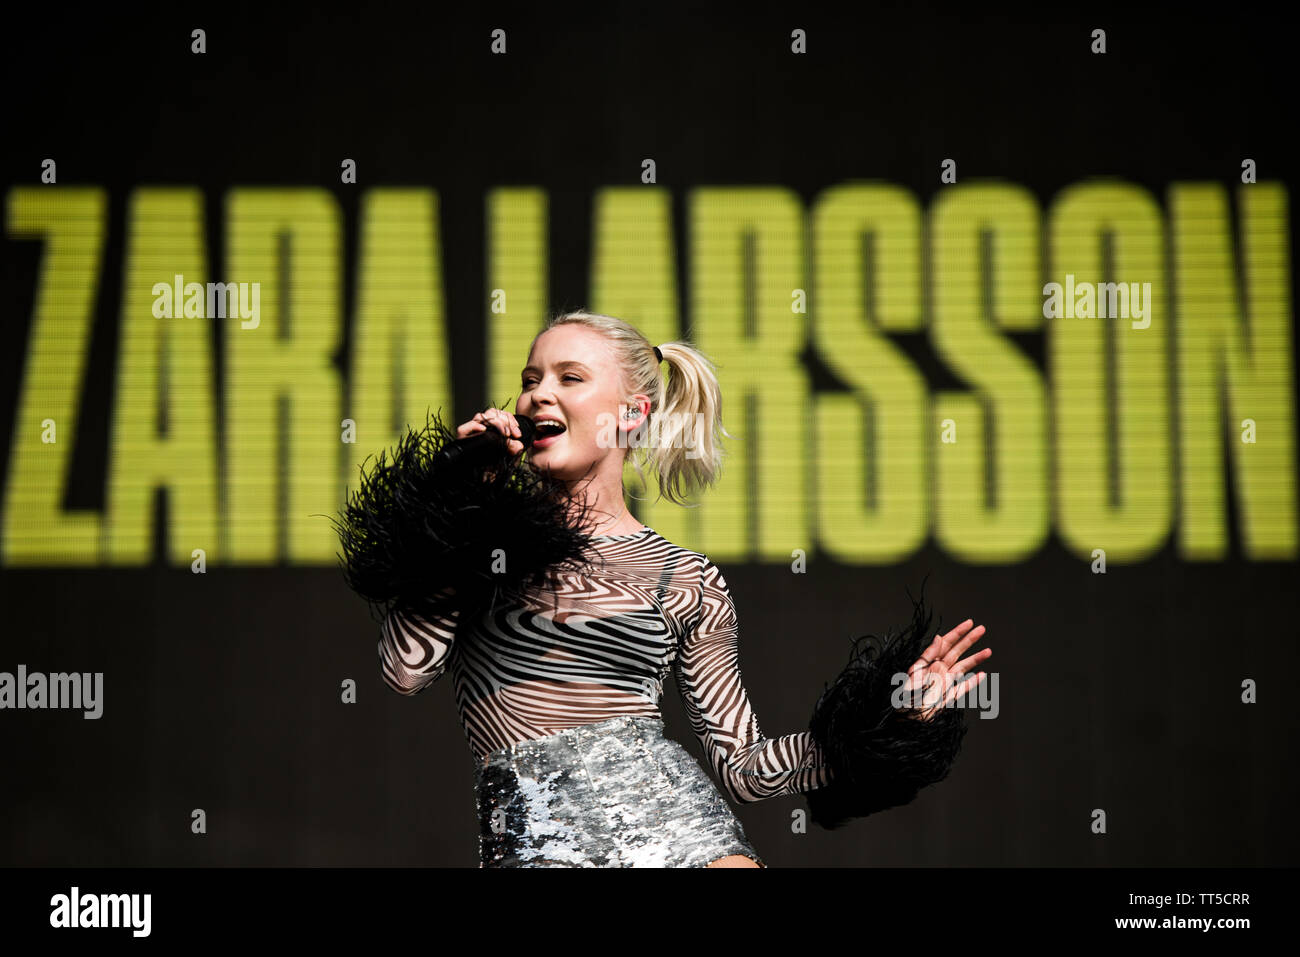 The Swedish singer Zara Larsson performing live on stage at the Firenze Rocks festival 2019 in Florence, Italy, opening for Ed Sheeran Stock Photo